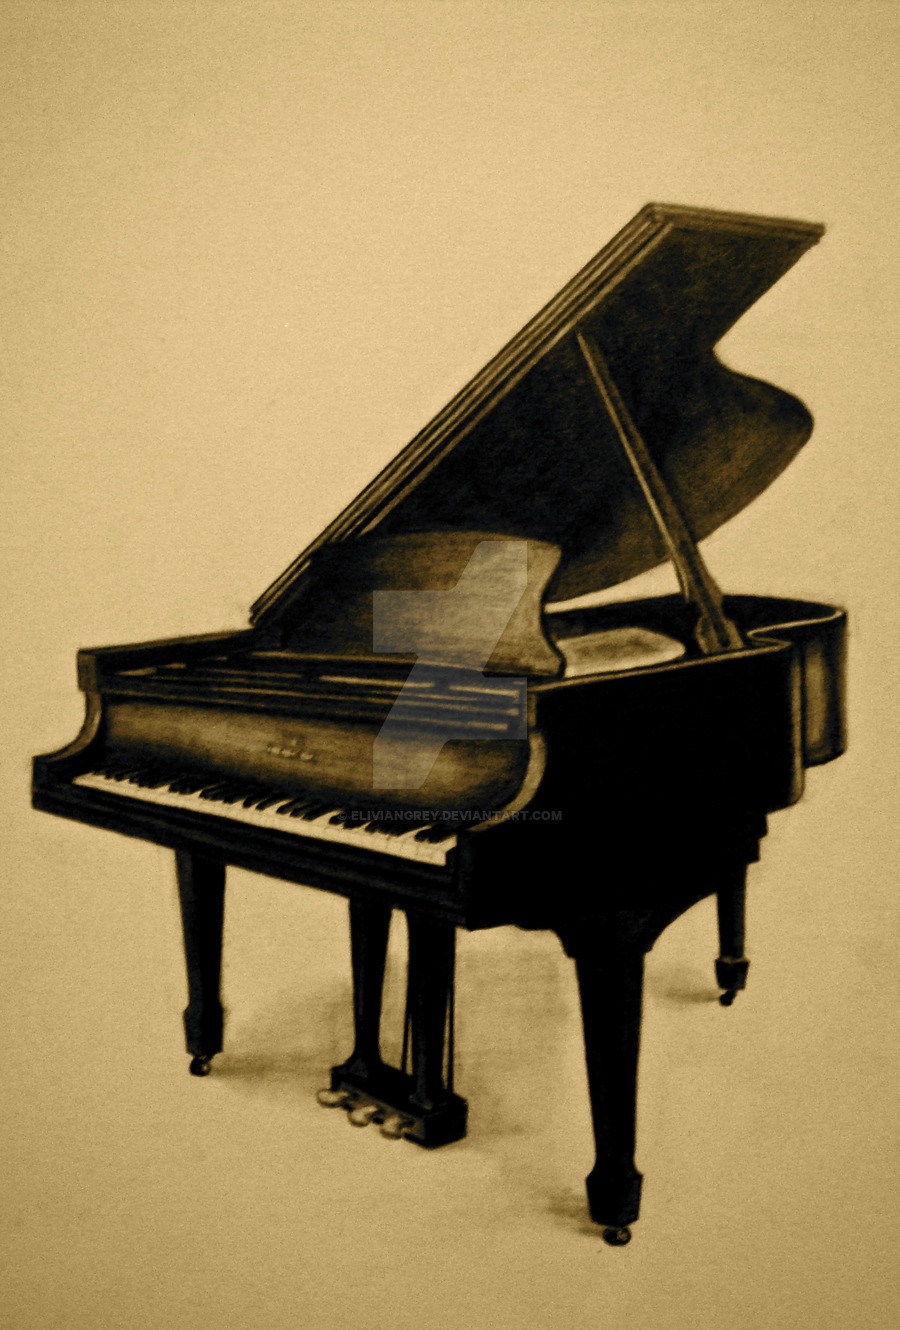 Awesome Grand Piano Tattoo Design By Eliviangrey